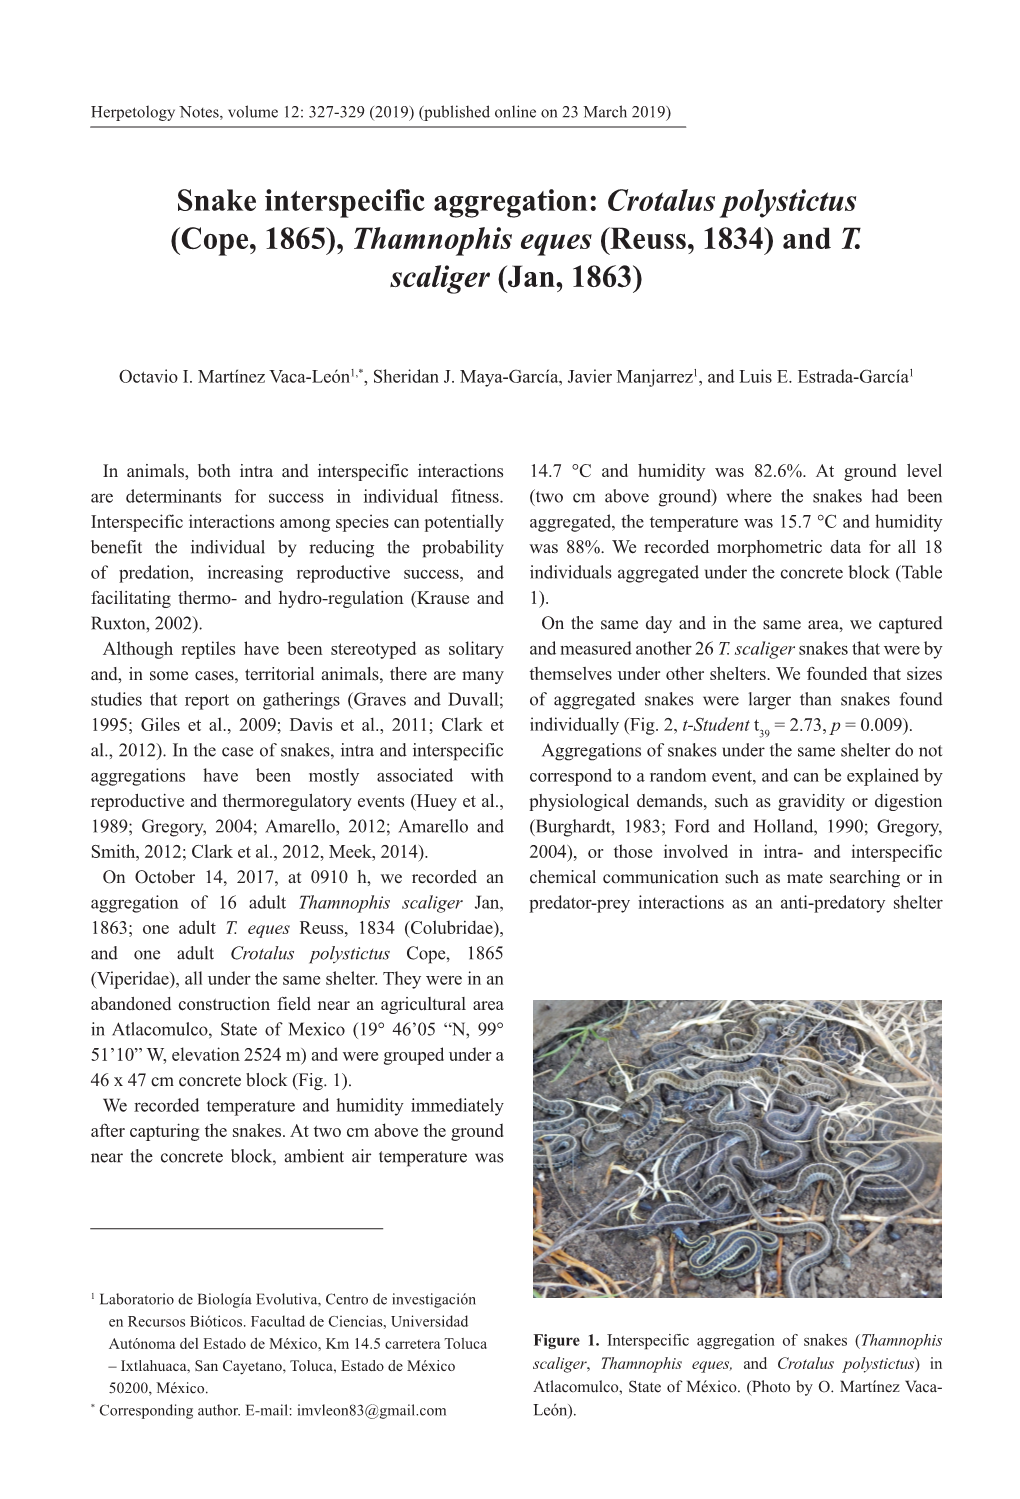 Crotalus Polystictus (Cope, 1865), Thamnophis Eques (Reuss, 1834) and T